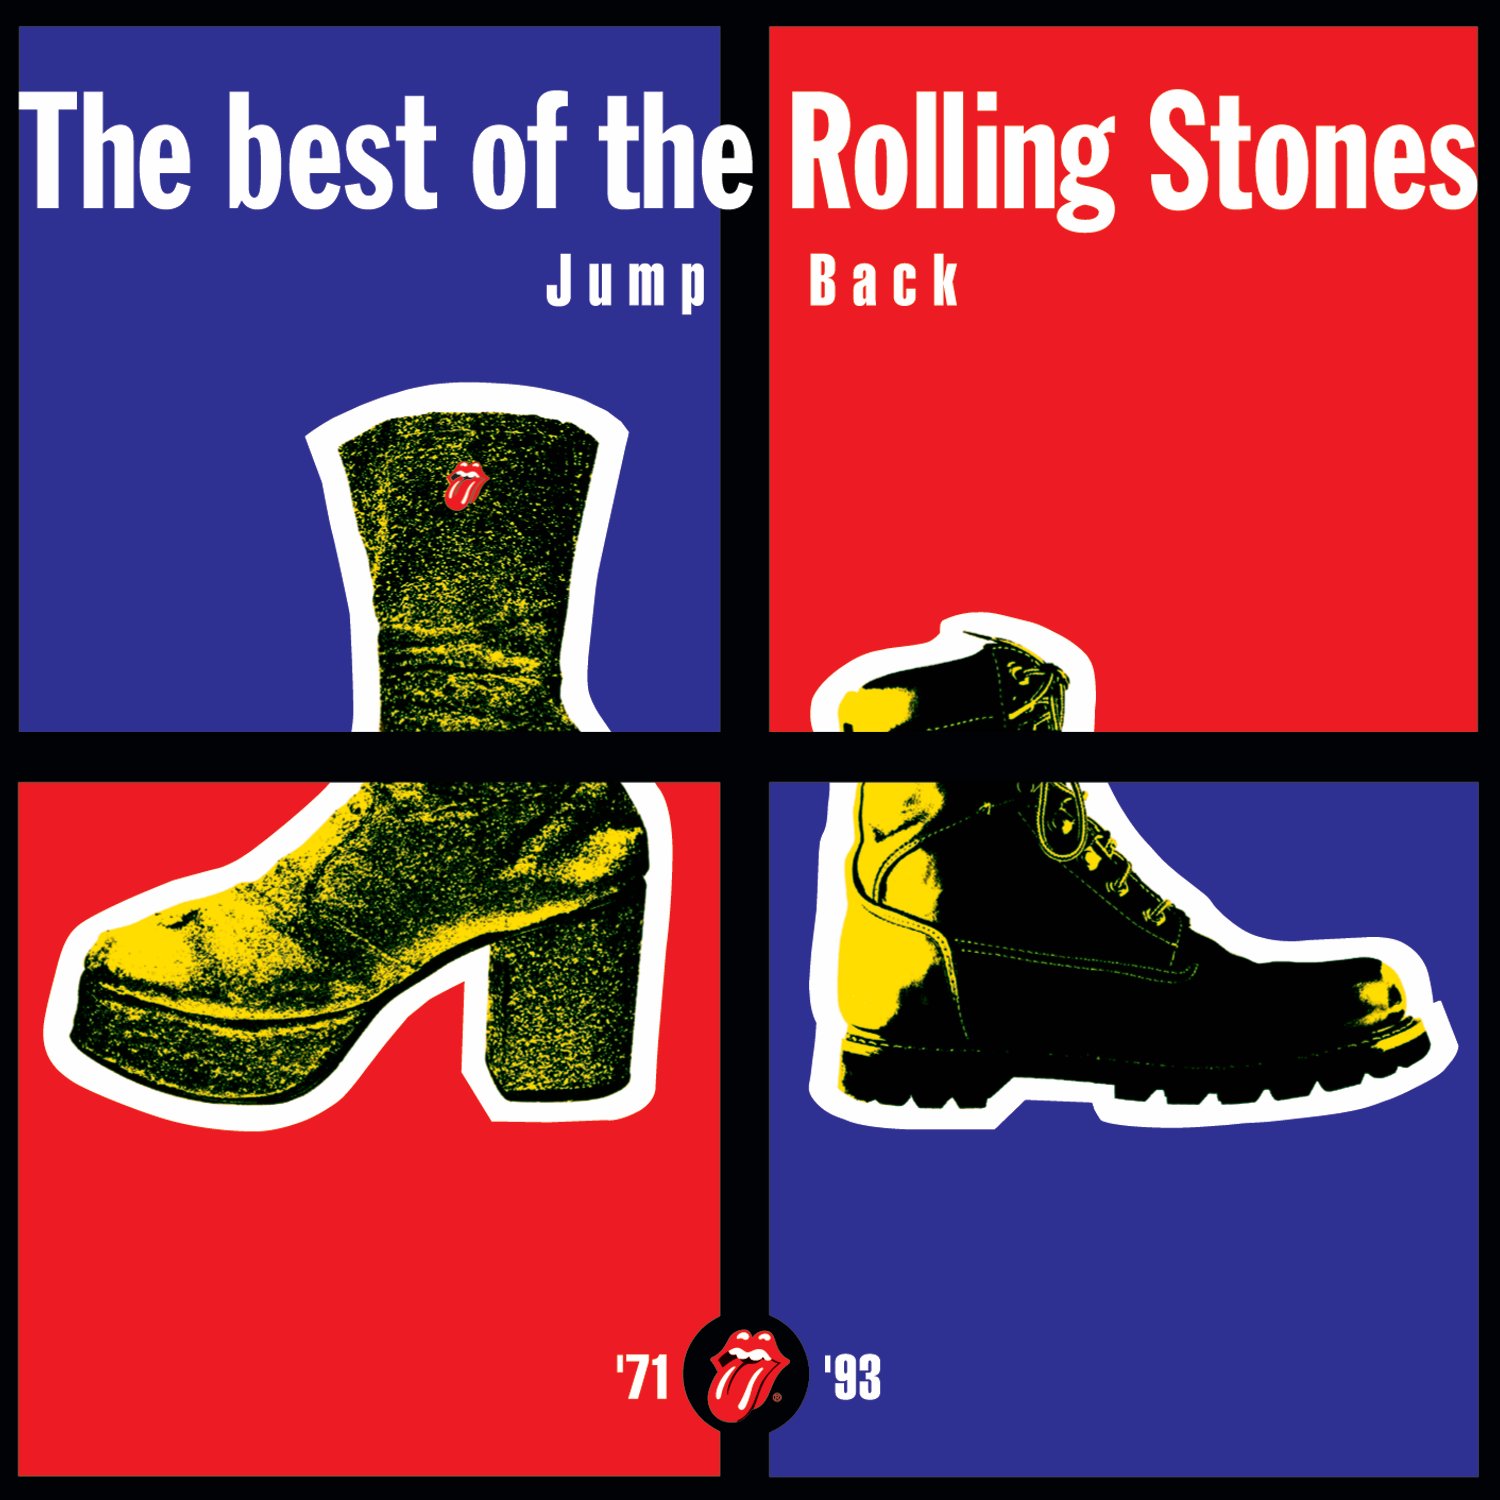 Jump back the best of the rolling stones 1994 mp3 320kbps vl2